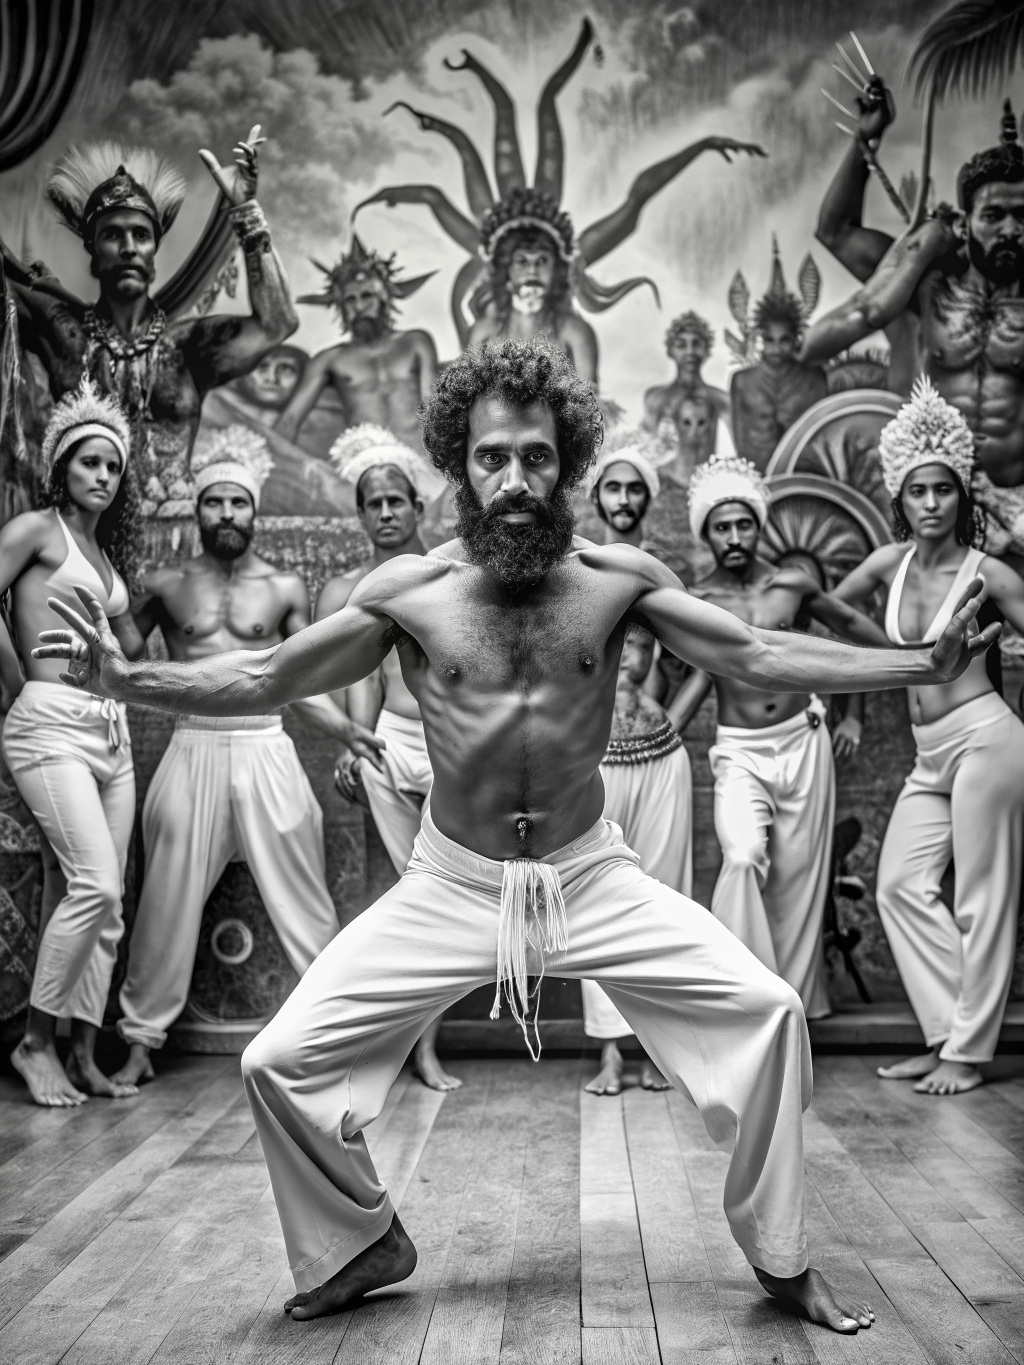 a black and white photo of a man in a tree, an album cover, by Harvey Pratt, surrealism, dancers, bearded, center of picture, sri lanka, lozhkin, 1970', 2018, capoeira, voodoo”